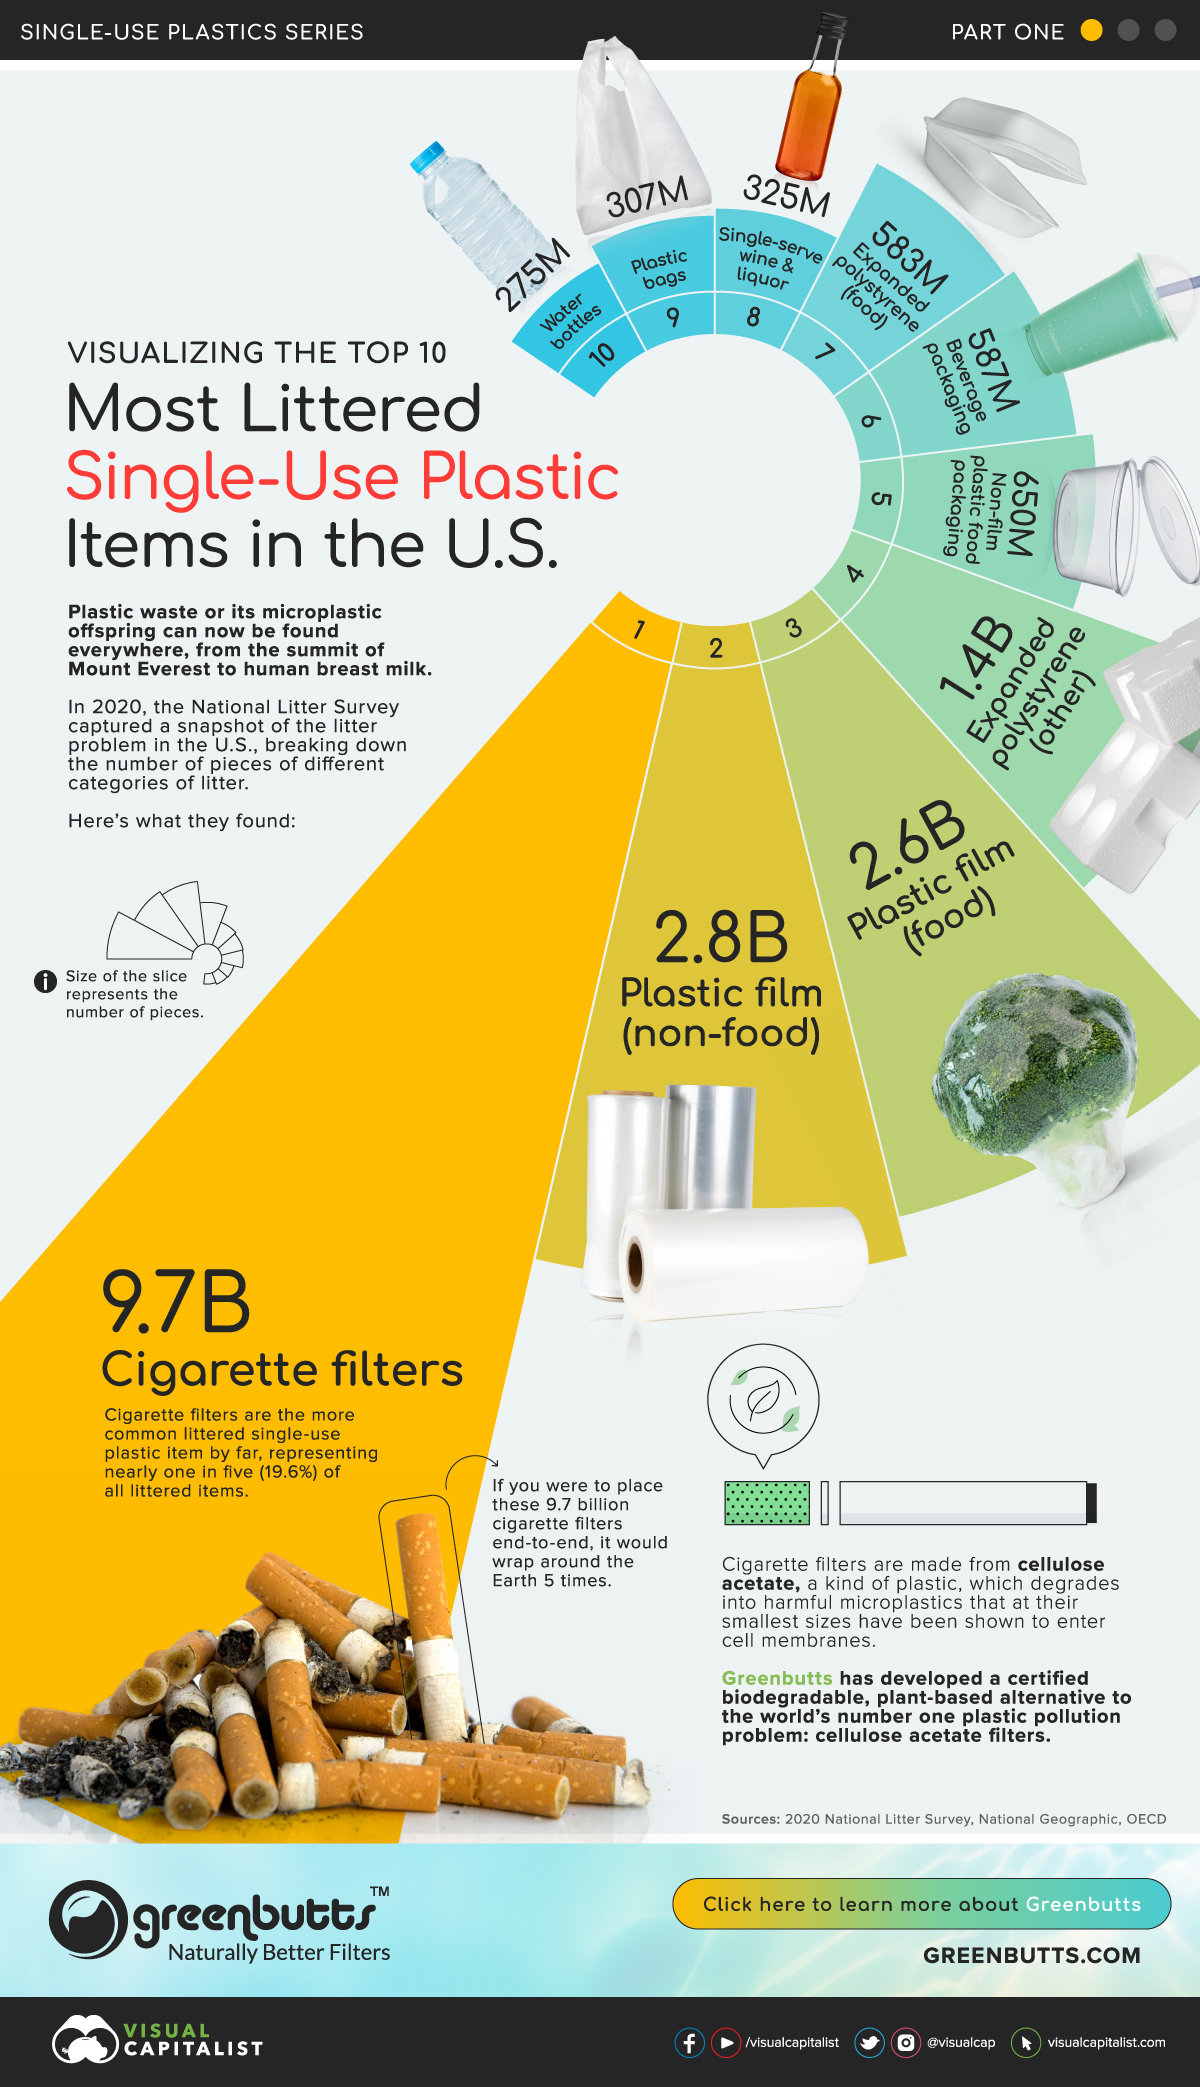 Top 10 Most Littered Single-Use Plastic Items in the U.S.